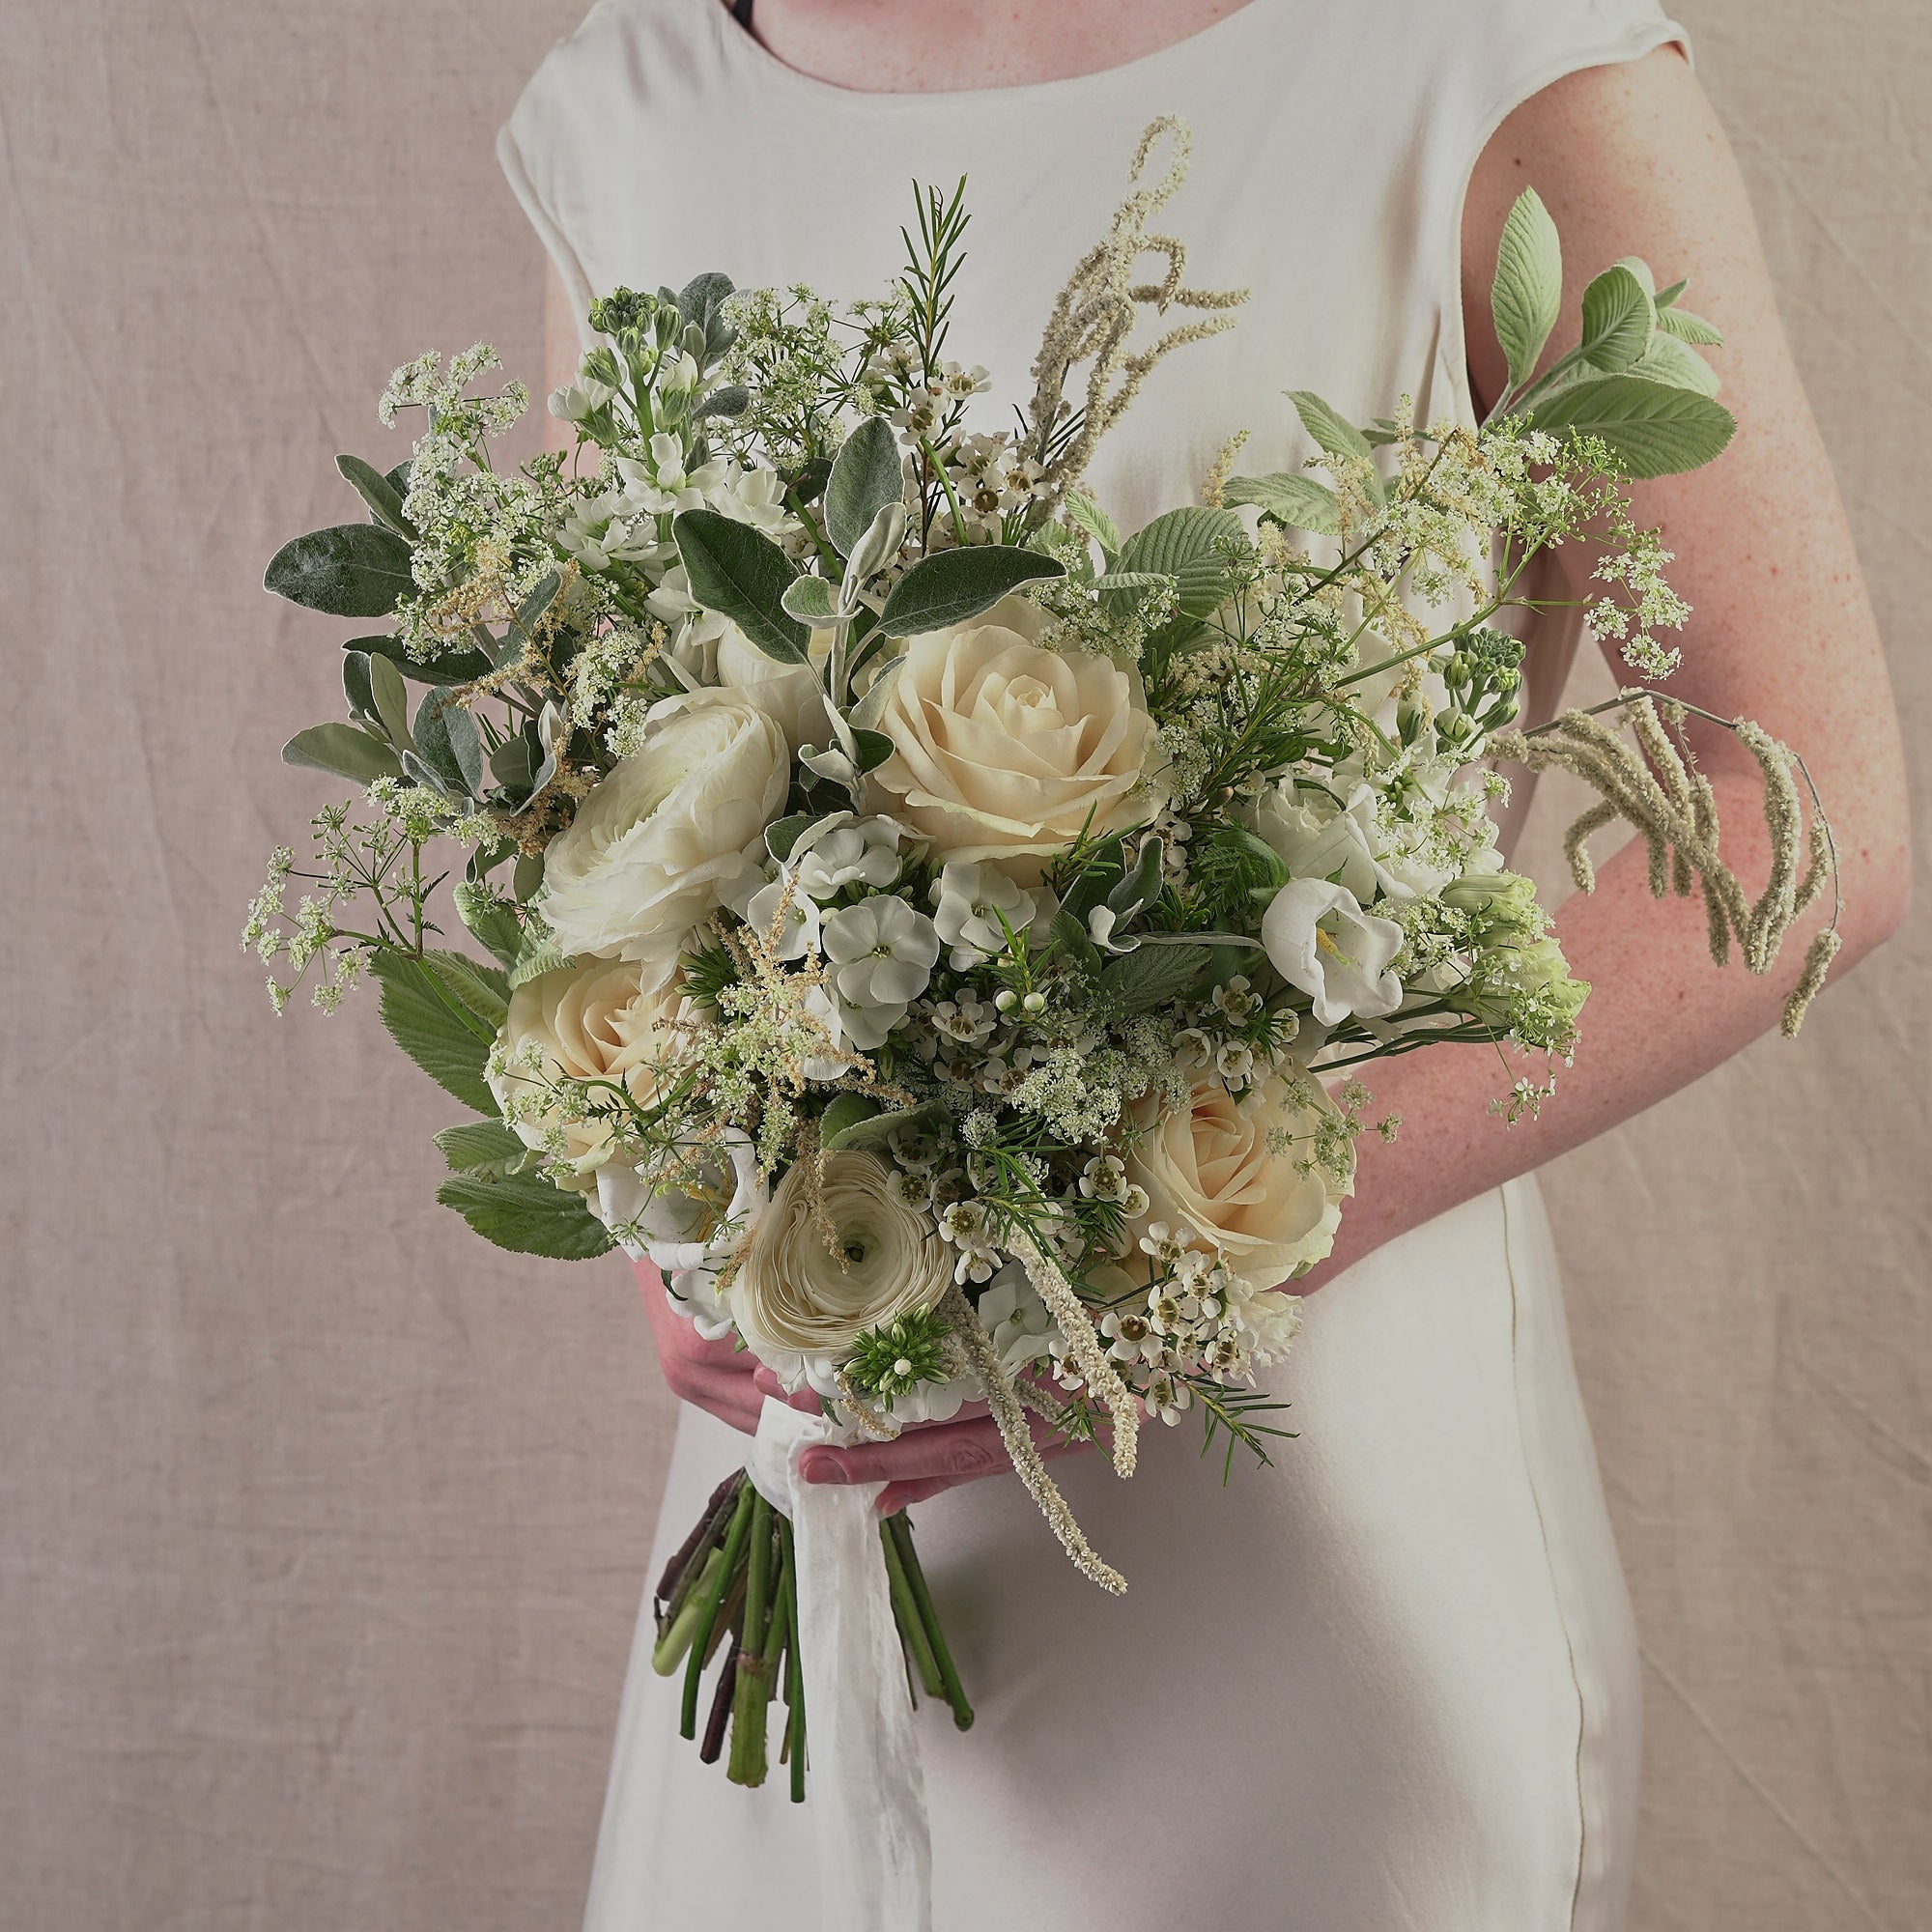 classic white bridesmaids bouquet with white and cream roses by Botanique Workshop